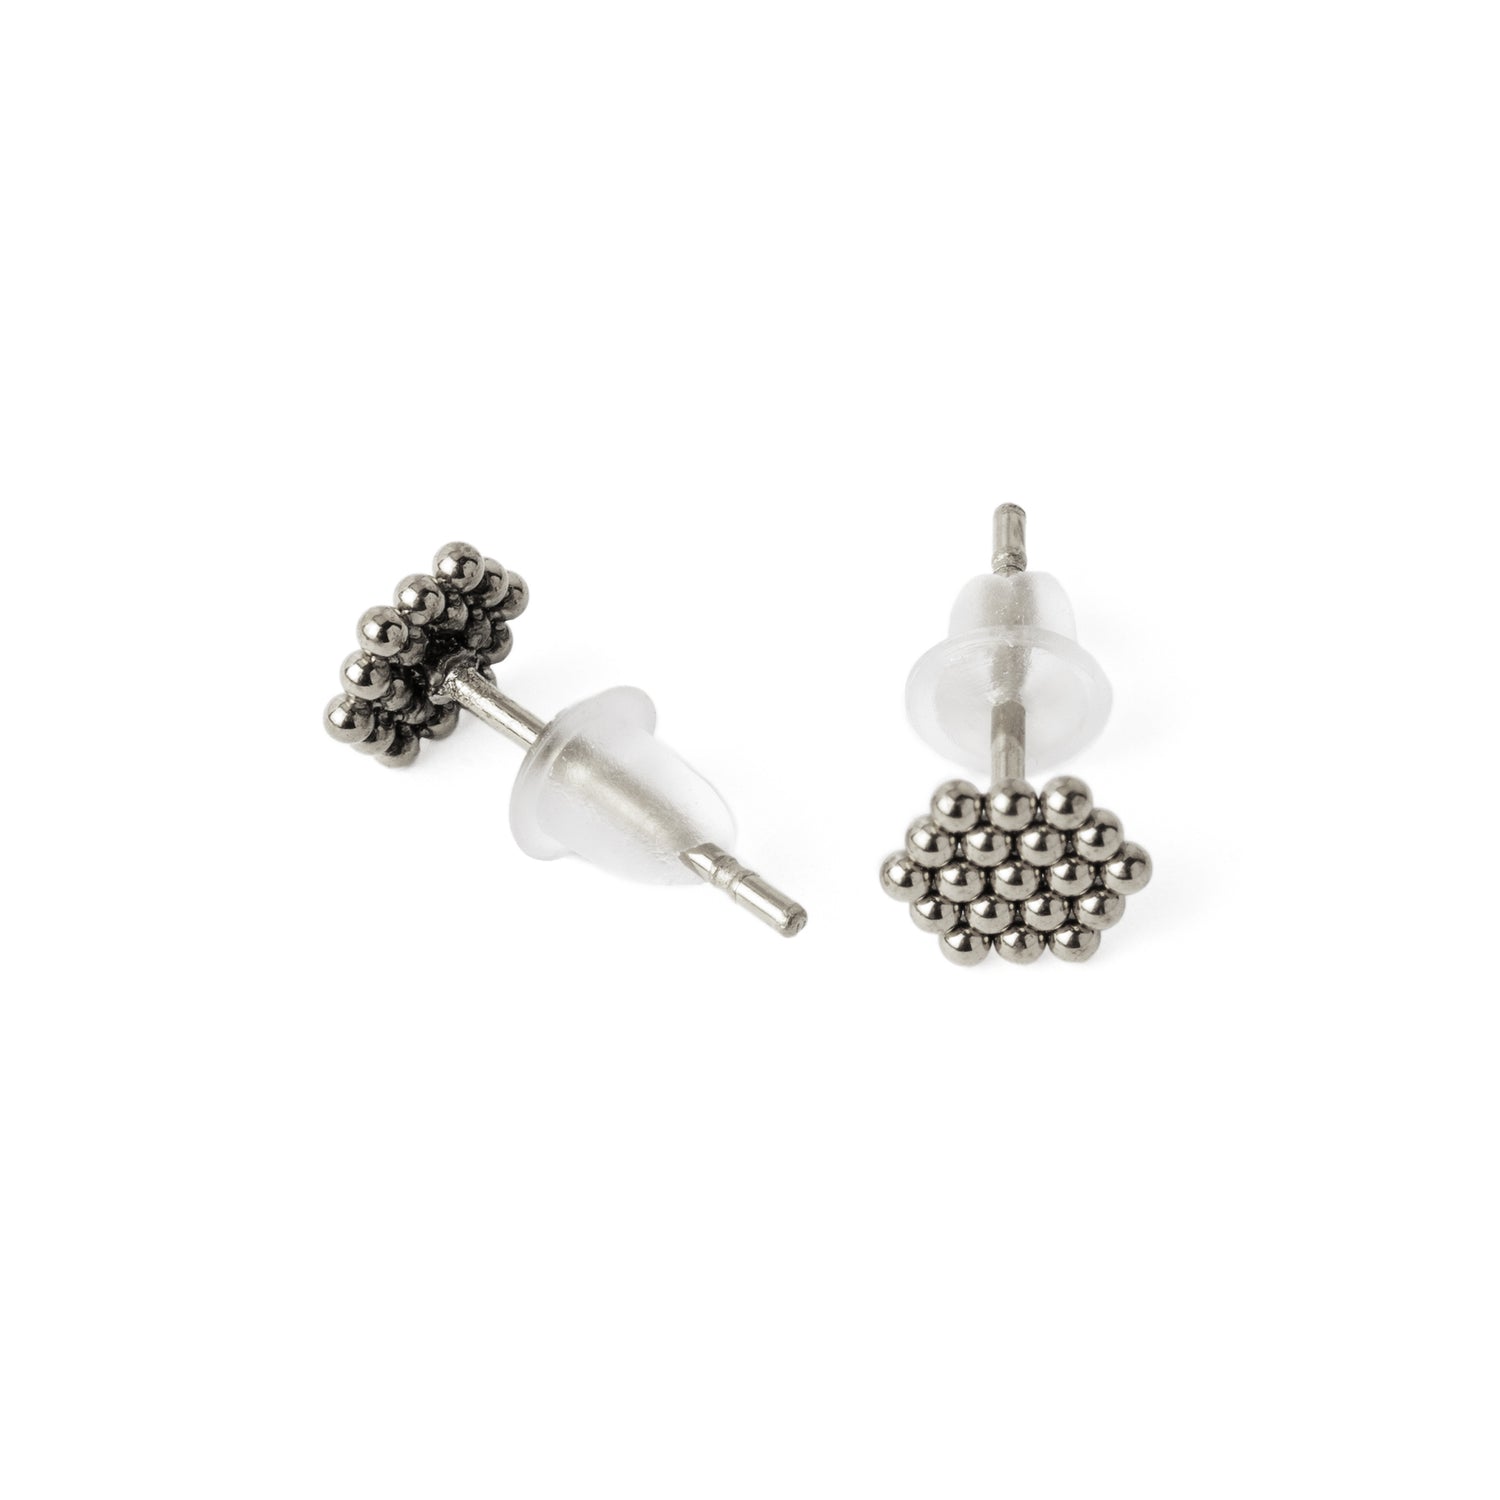 Dotted Hexagon Ear Studs front and back view